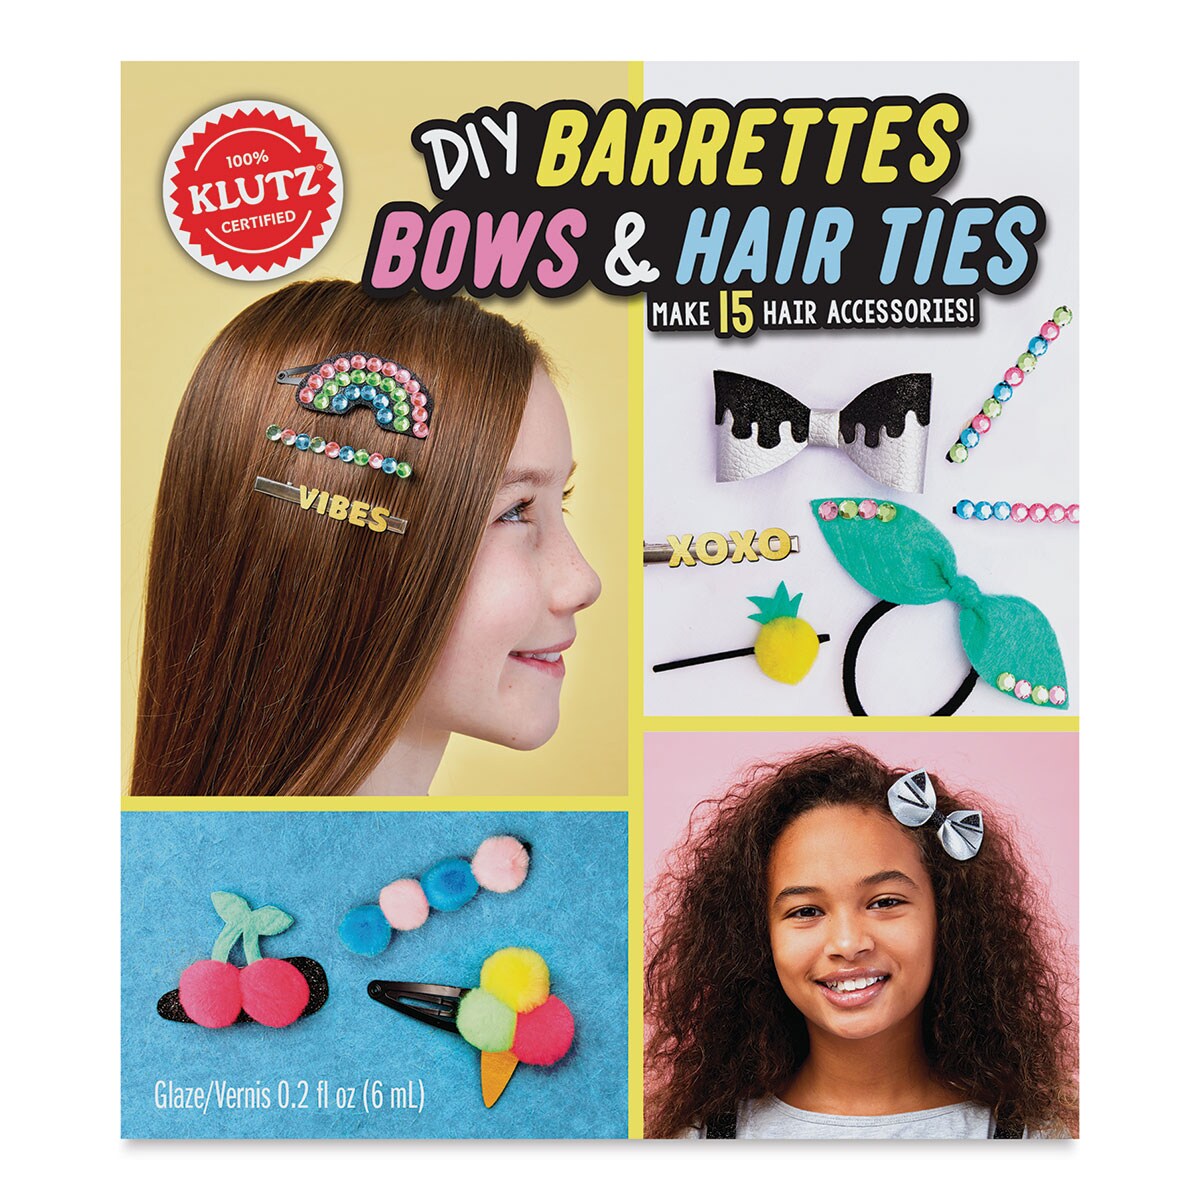 Klutz DIY Barrettes, Bows and Hair Ties